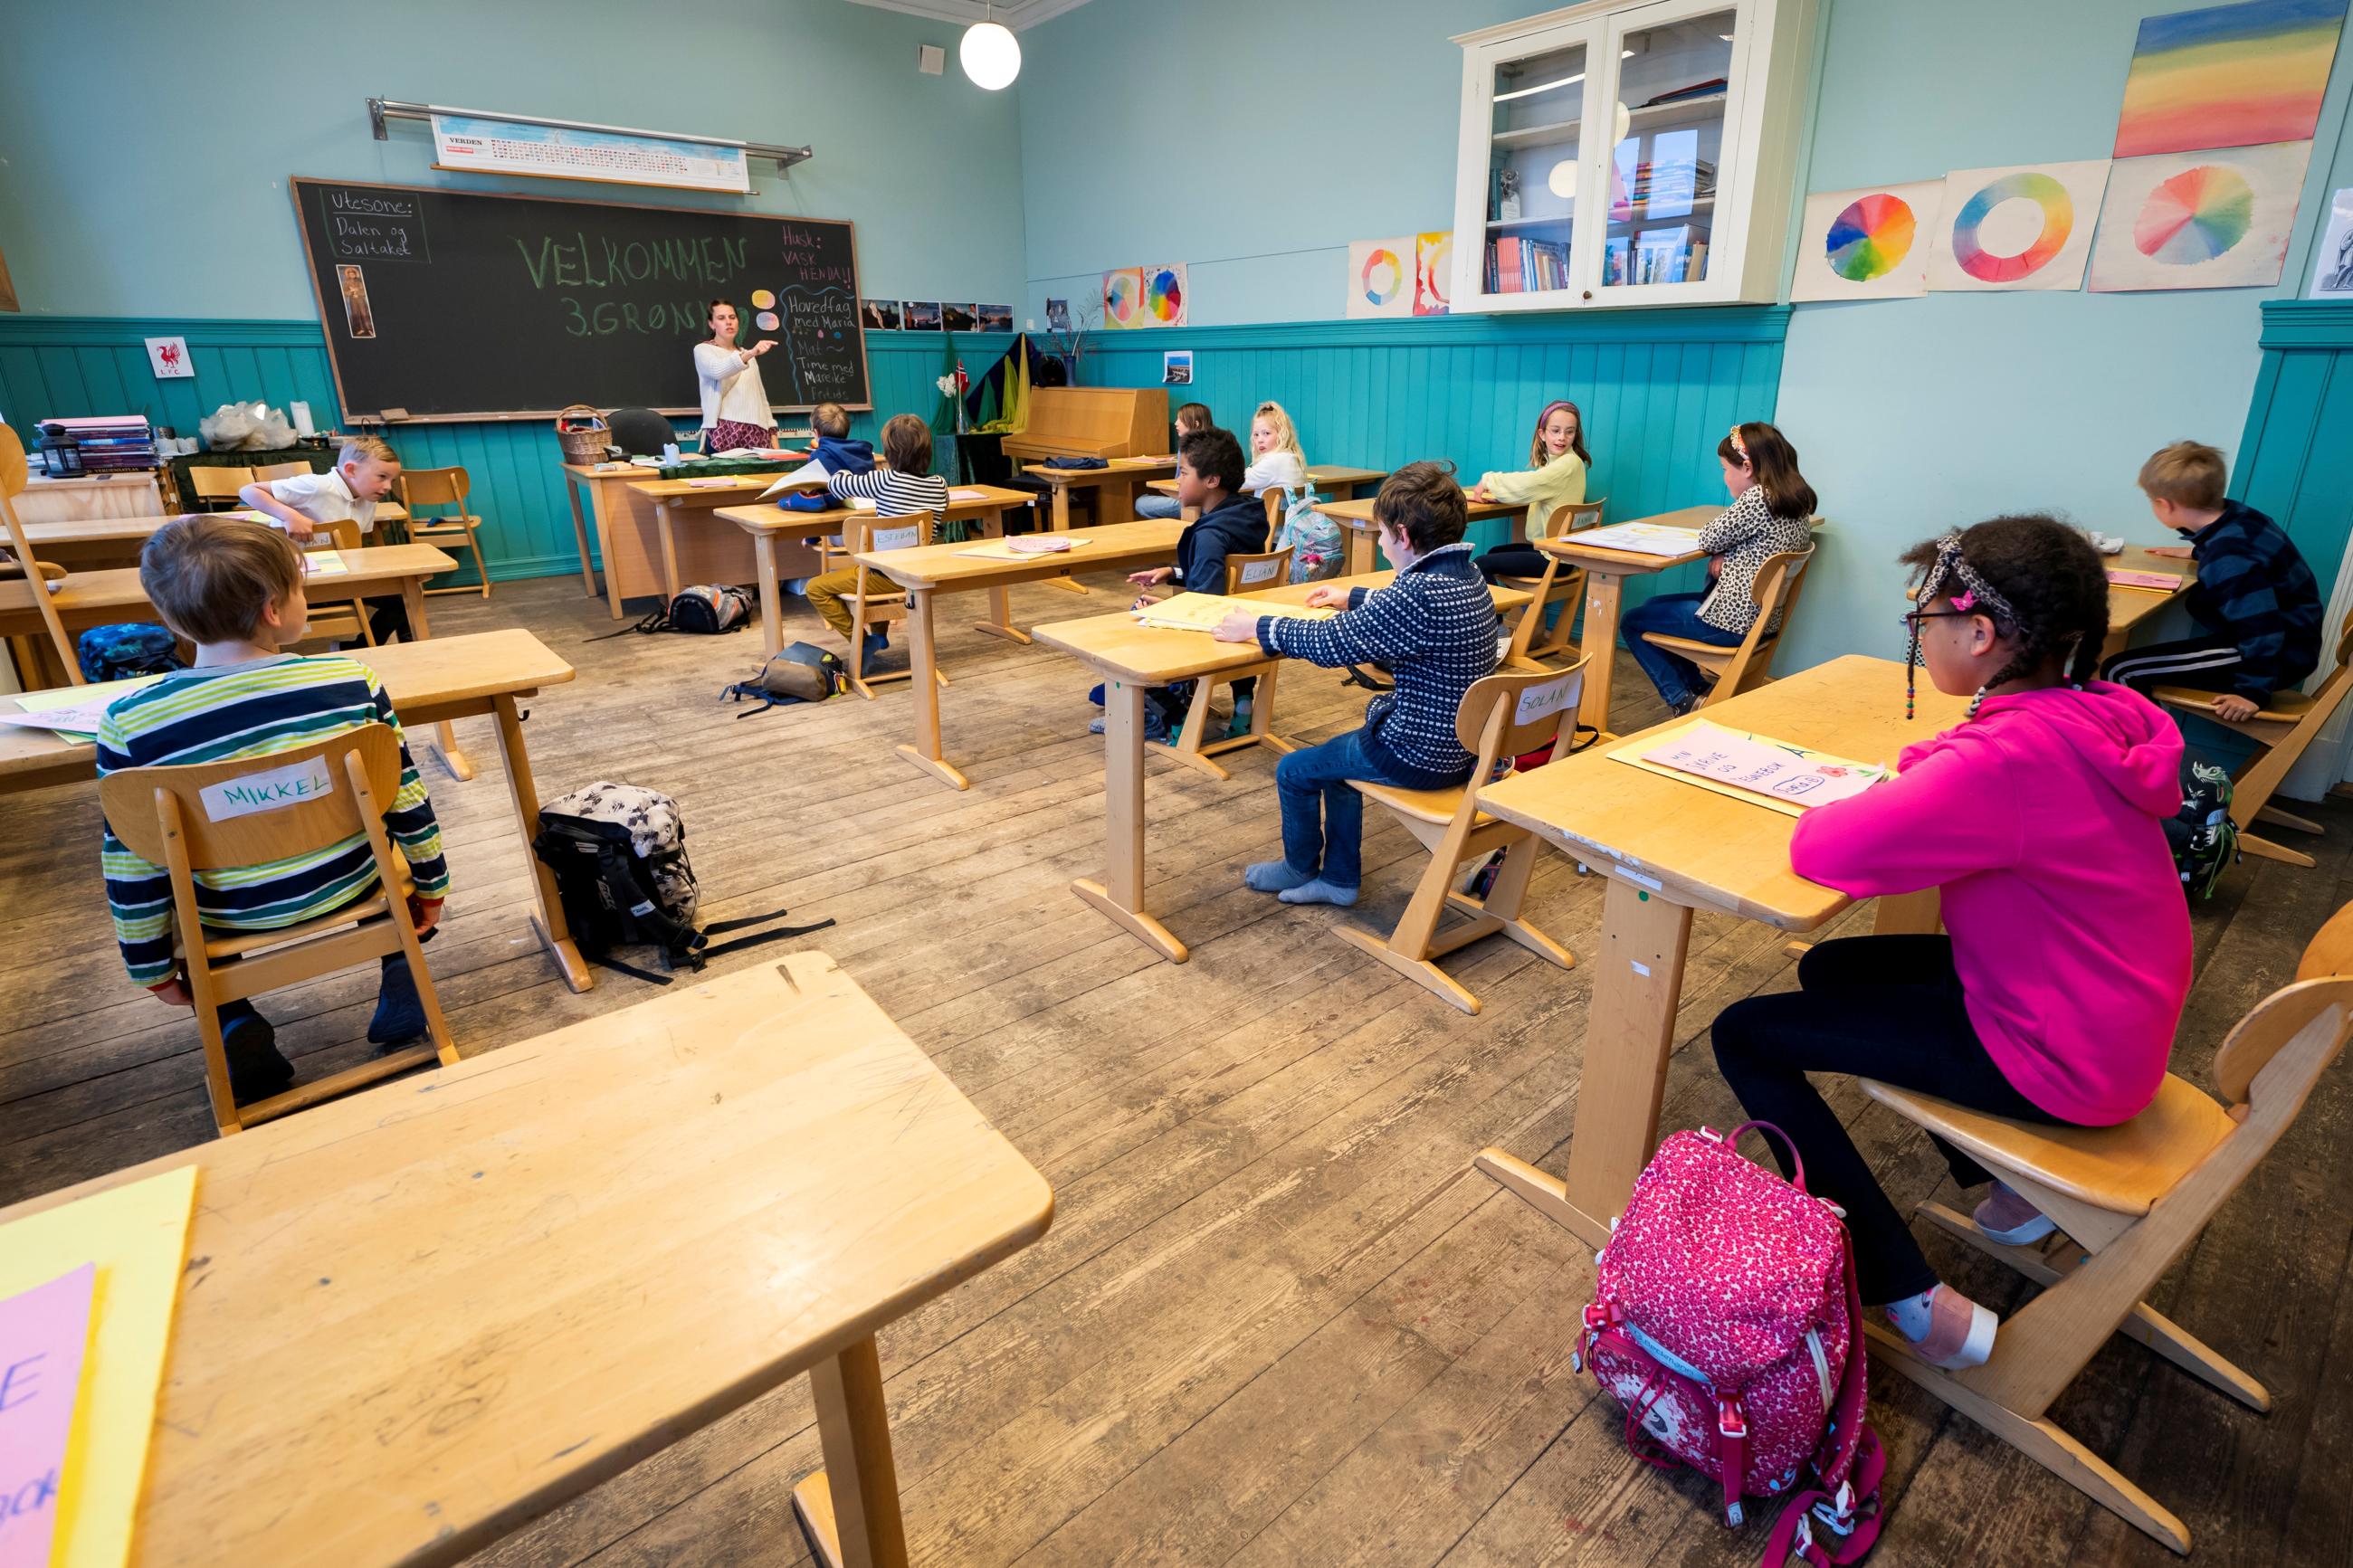 A teacher conducts classes at Nordstrand Steinerskole in Oslo, Norway.